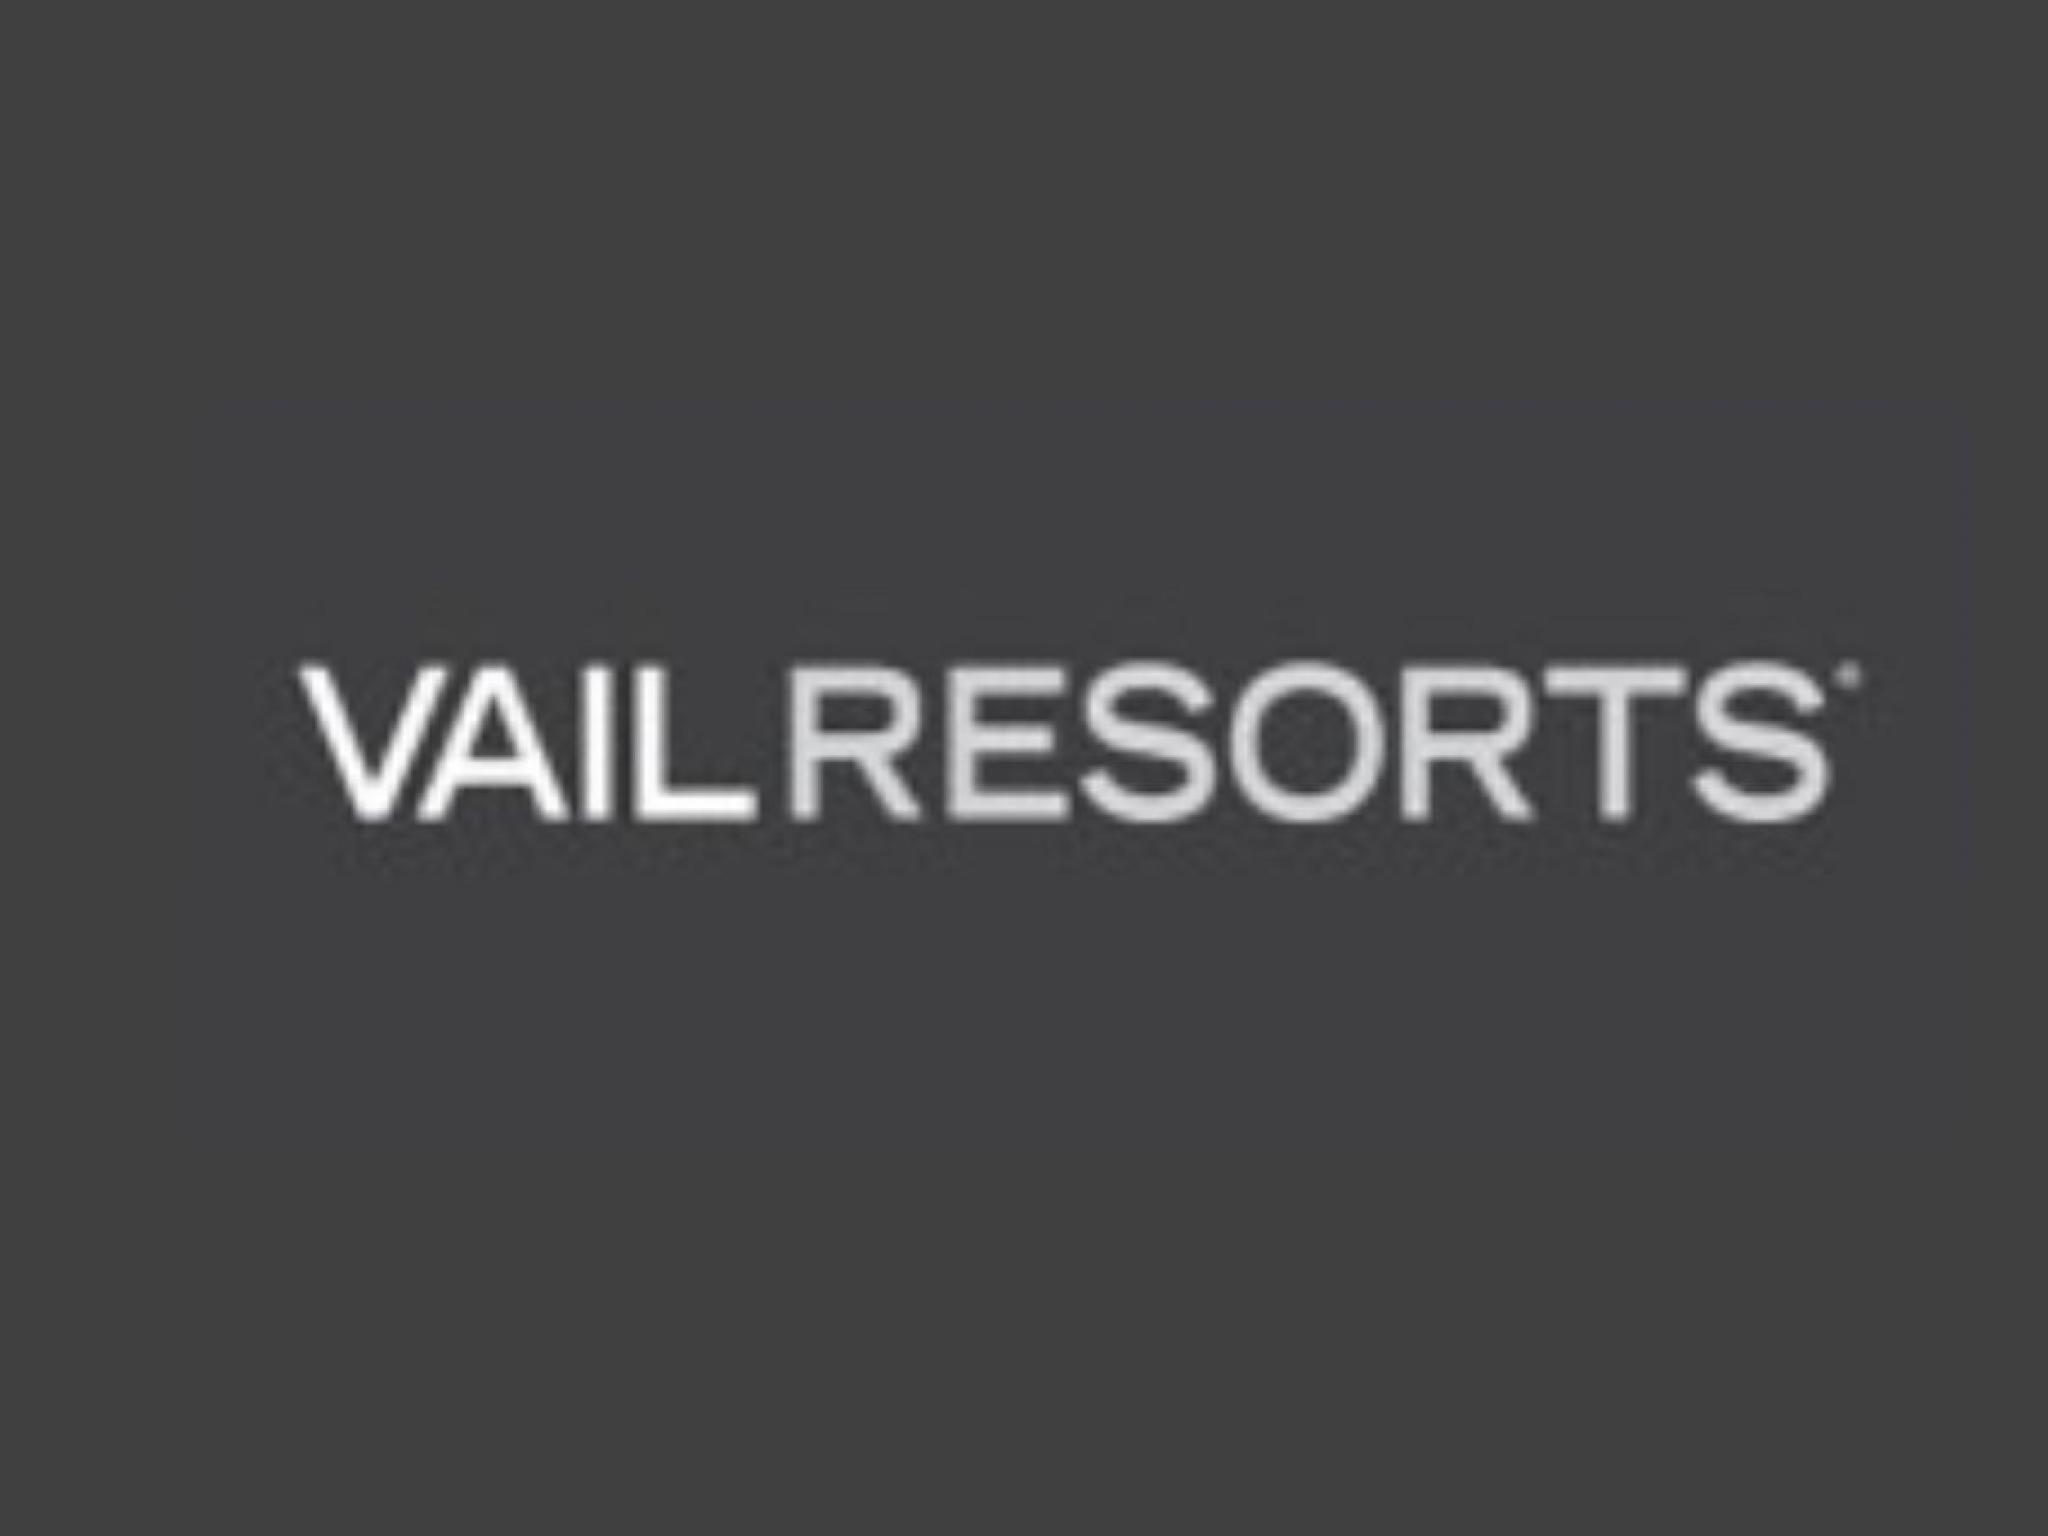  vail-resorts-carnival-opera-and-other-big-stocks-moving-lower-on-friday 